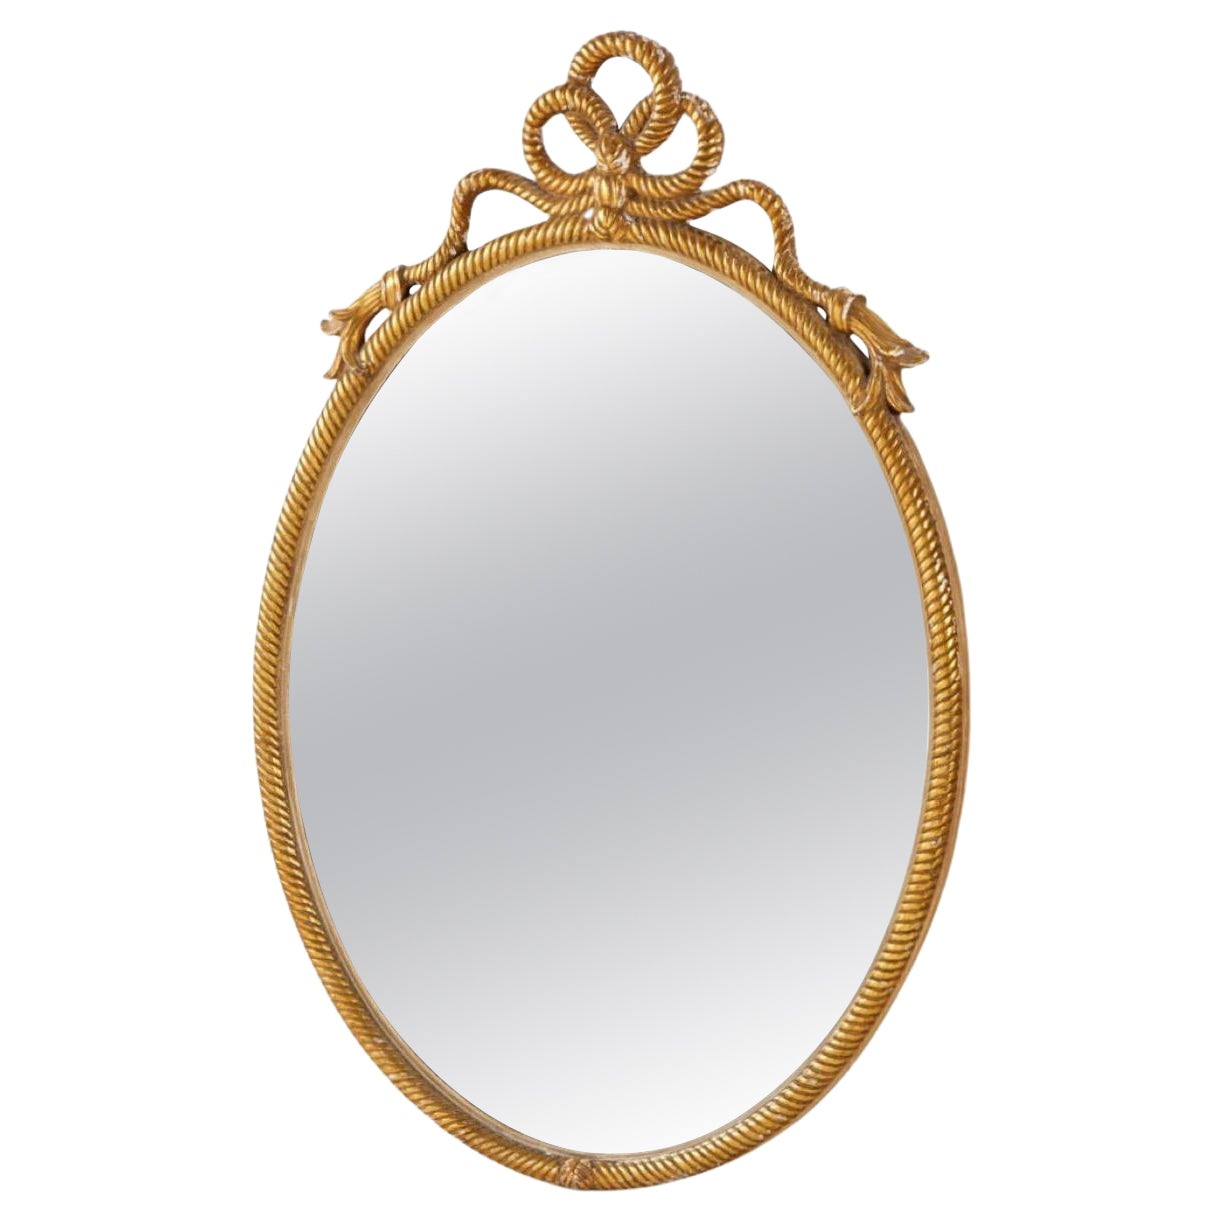 Early 20th Century Giltwood Rope-Twist Oval Mirror by Harris Interior Arts Inc. 